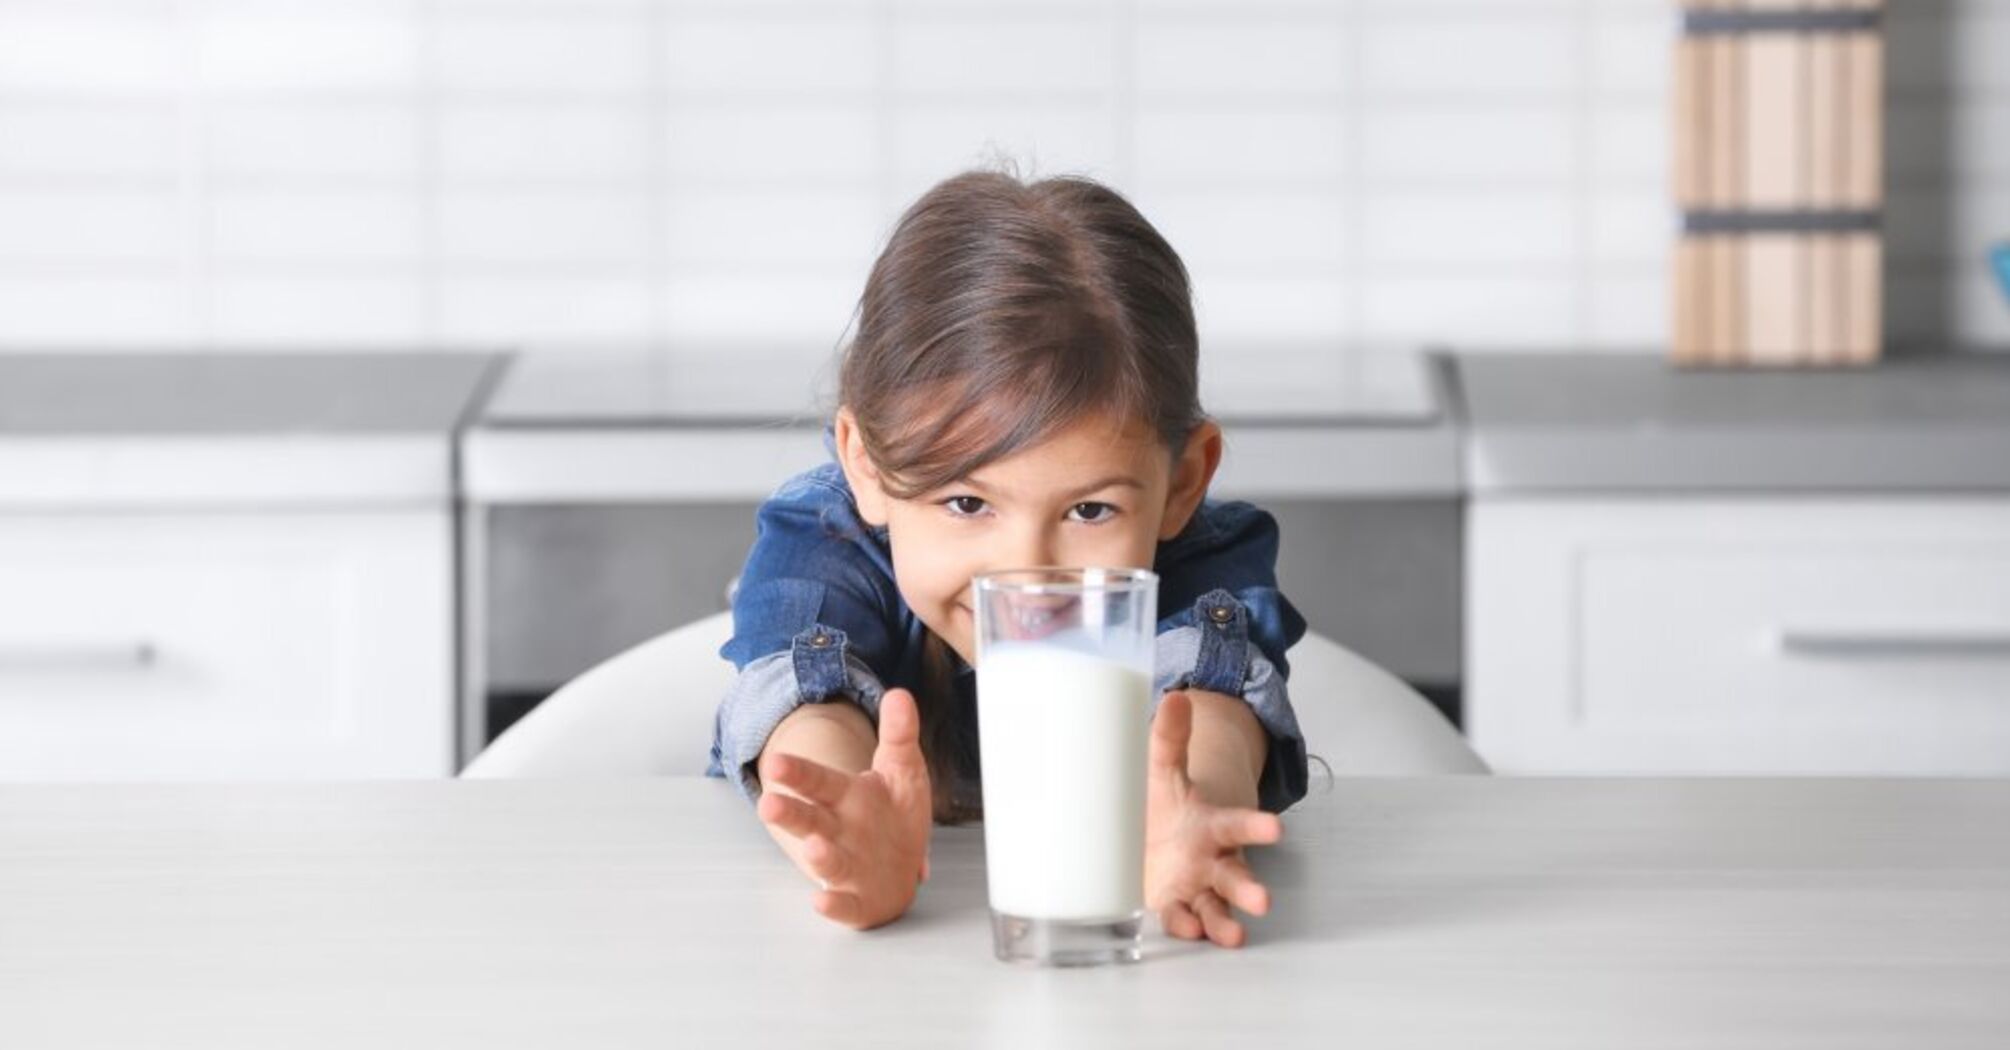 What happens if you drink milk every day